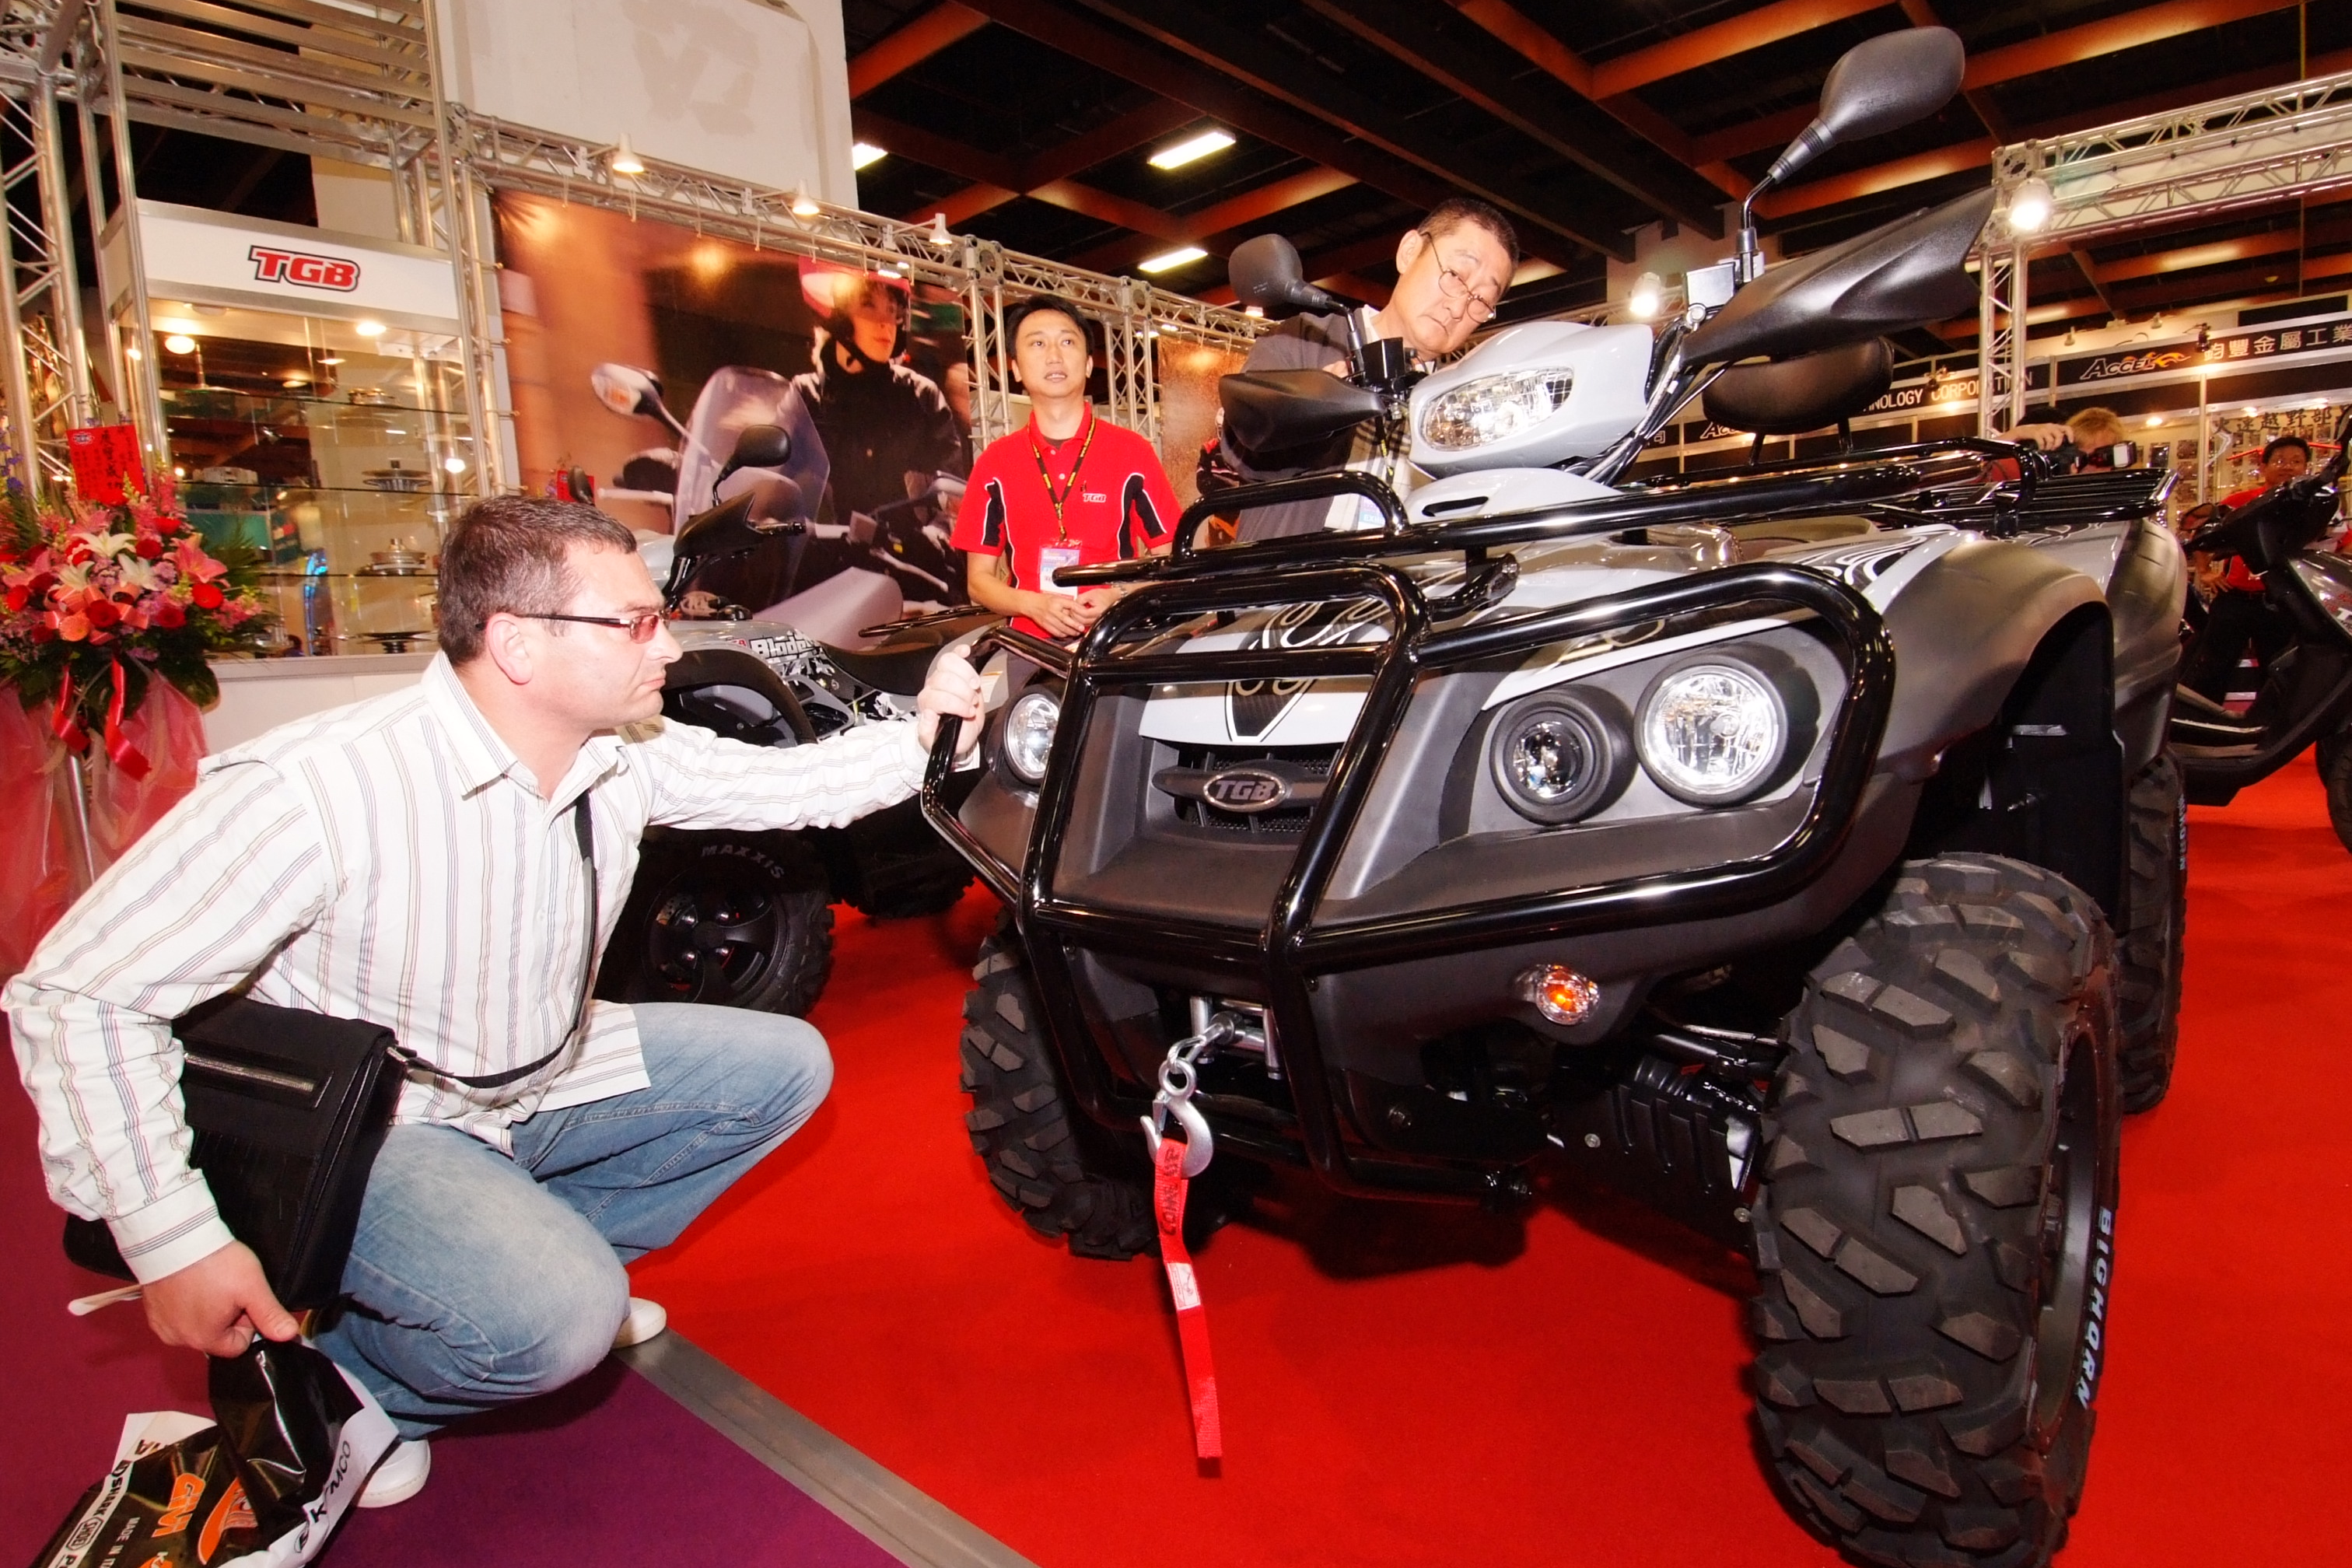 International buyers carefully look over high-quality powersports products made by local companies.